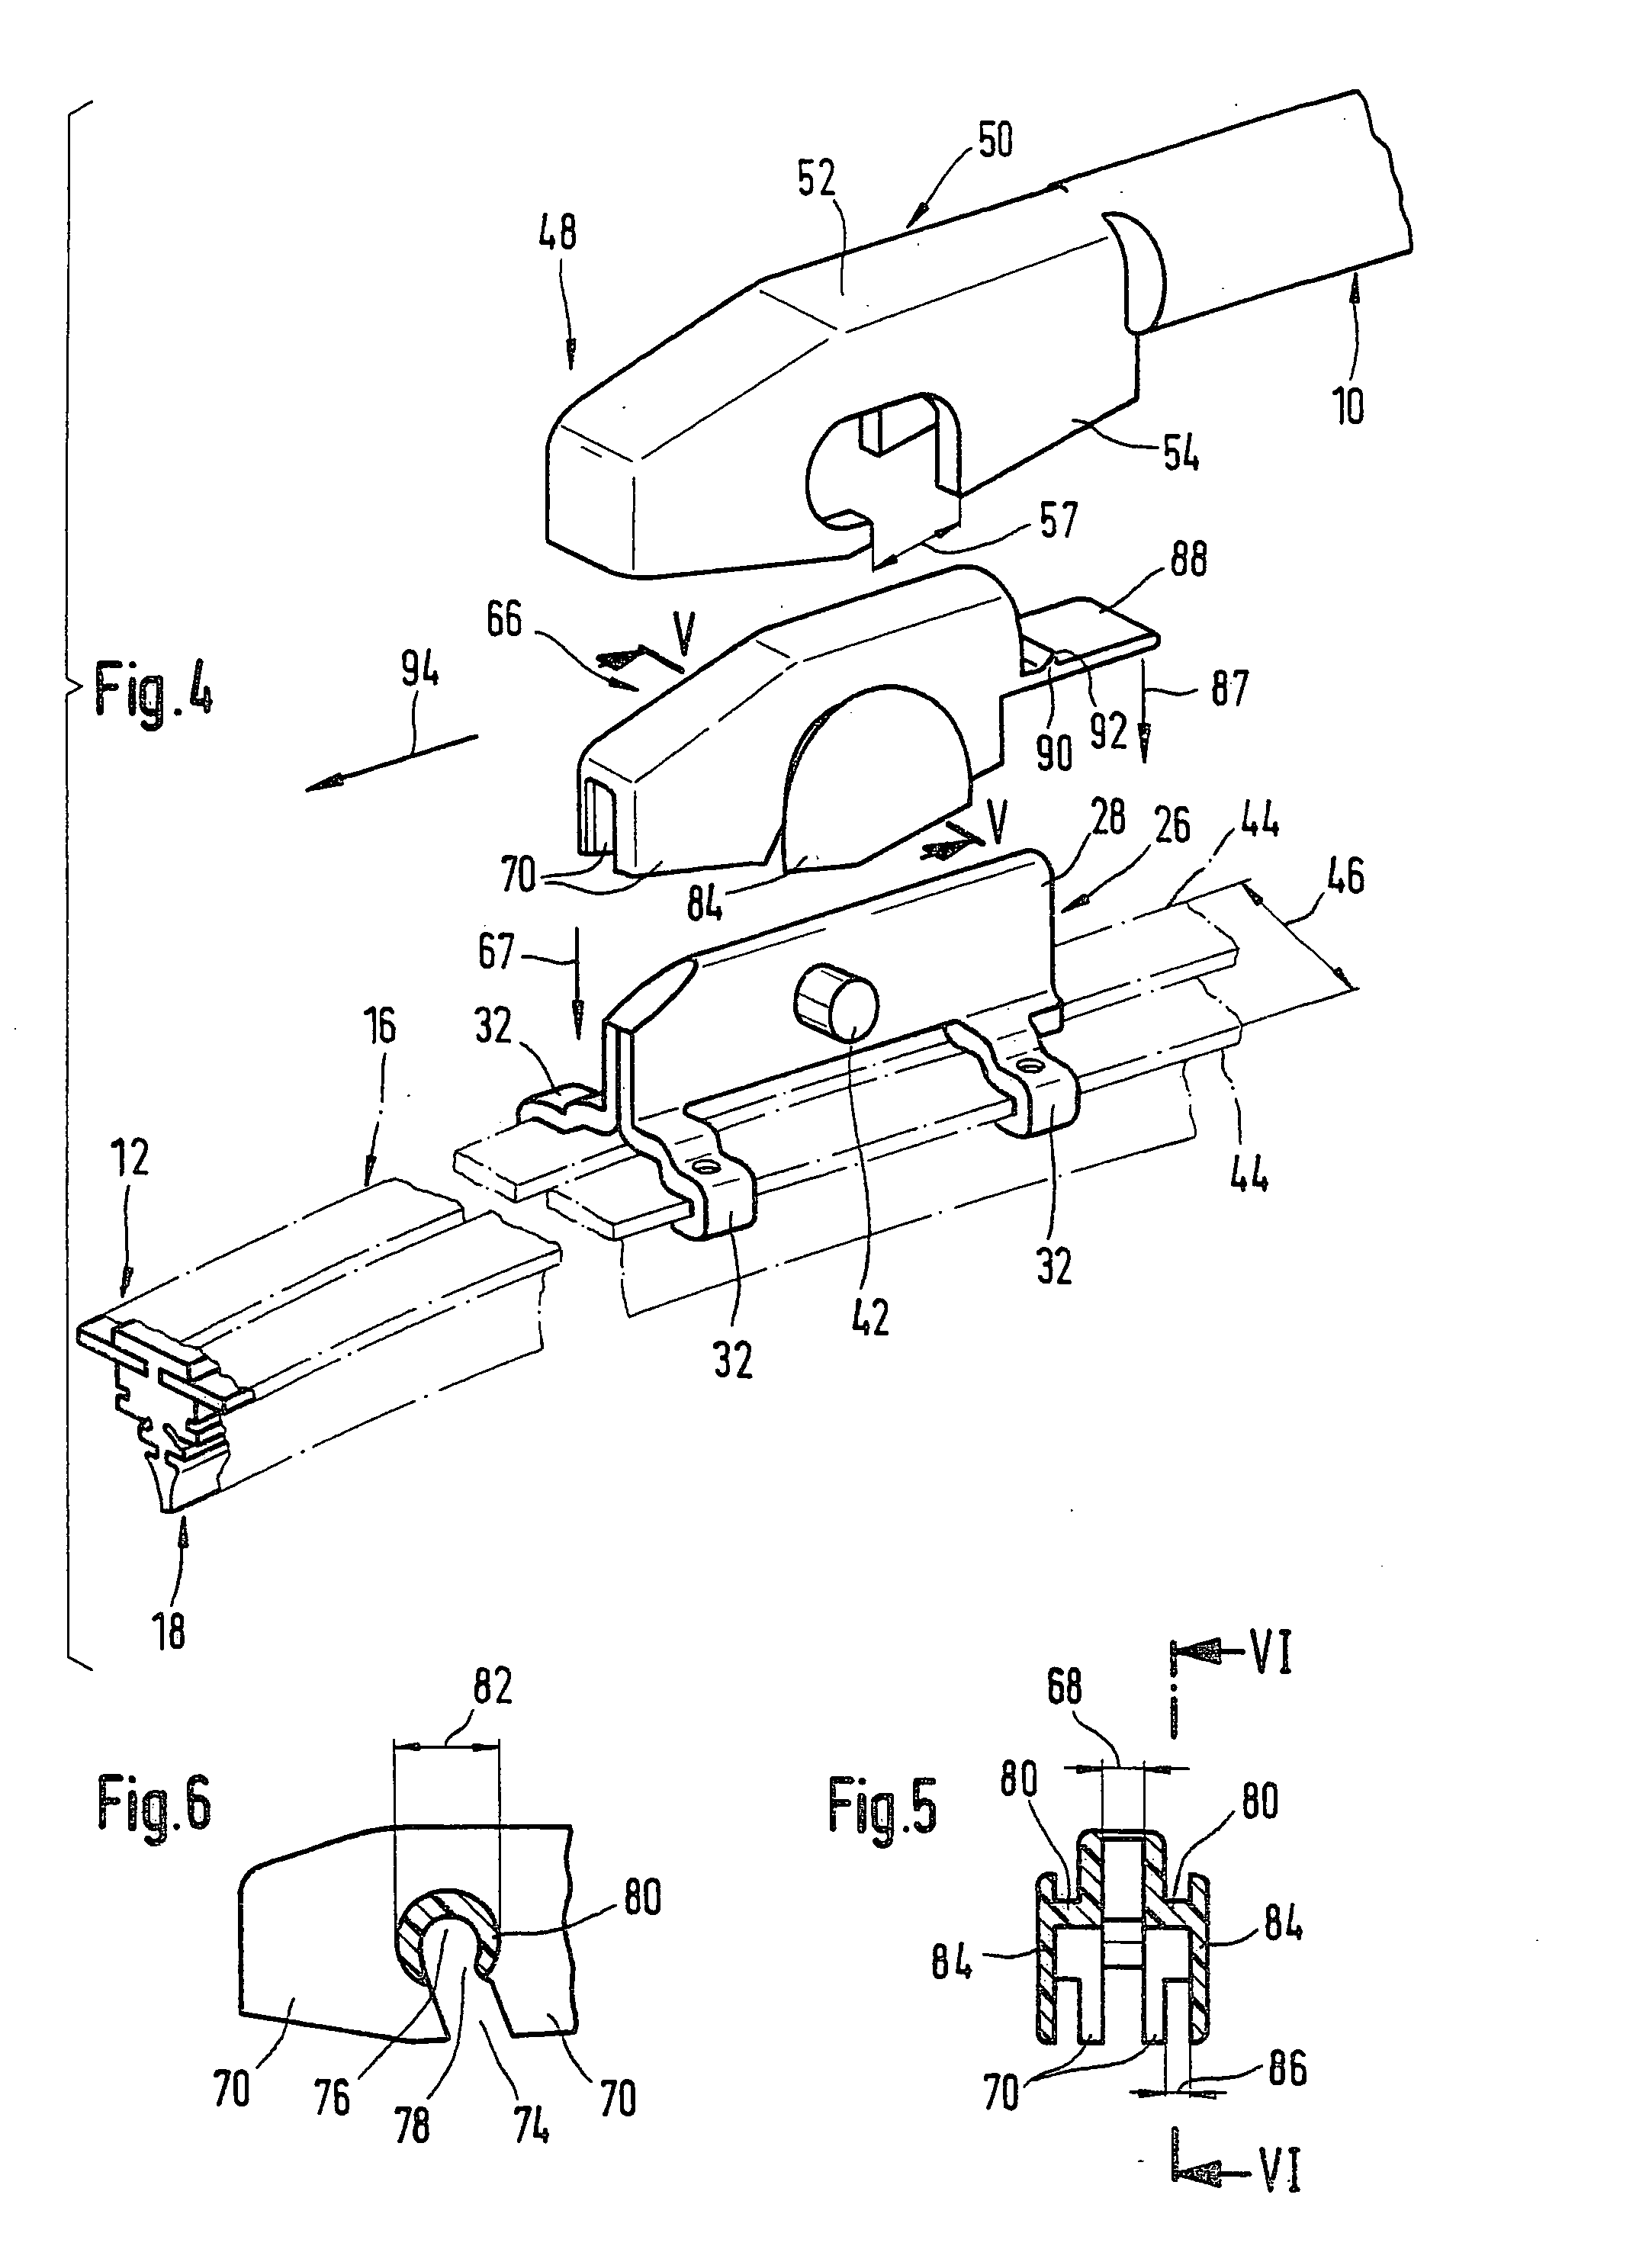 Device for detachably linking a wiper blade with a wiper arm